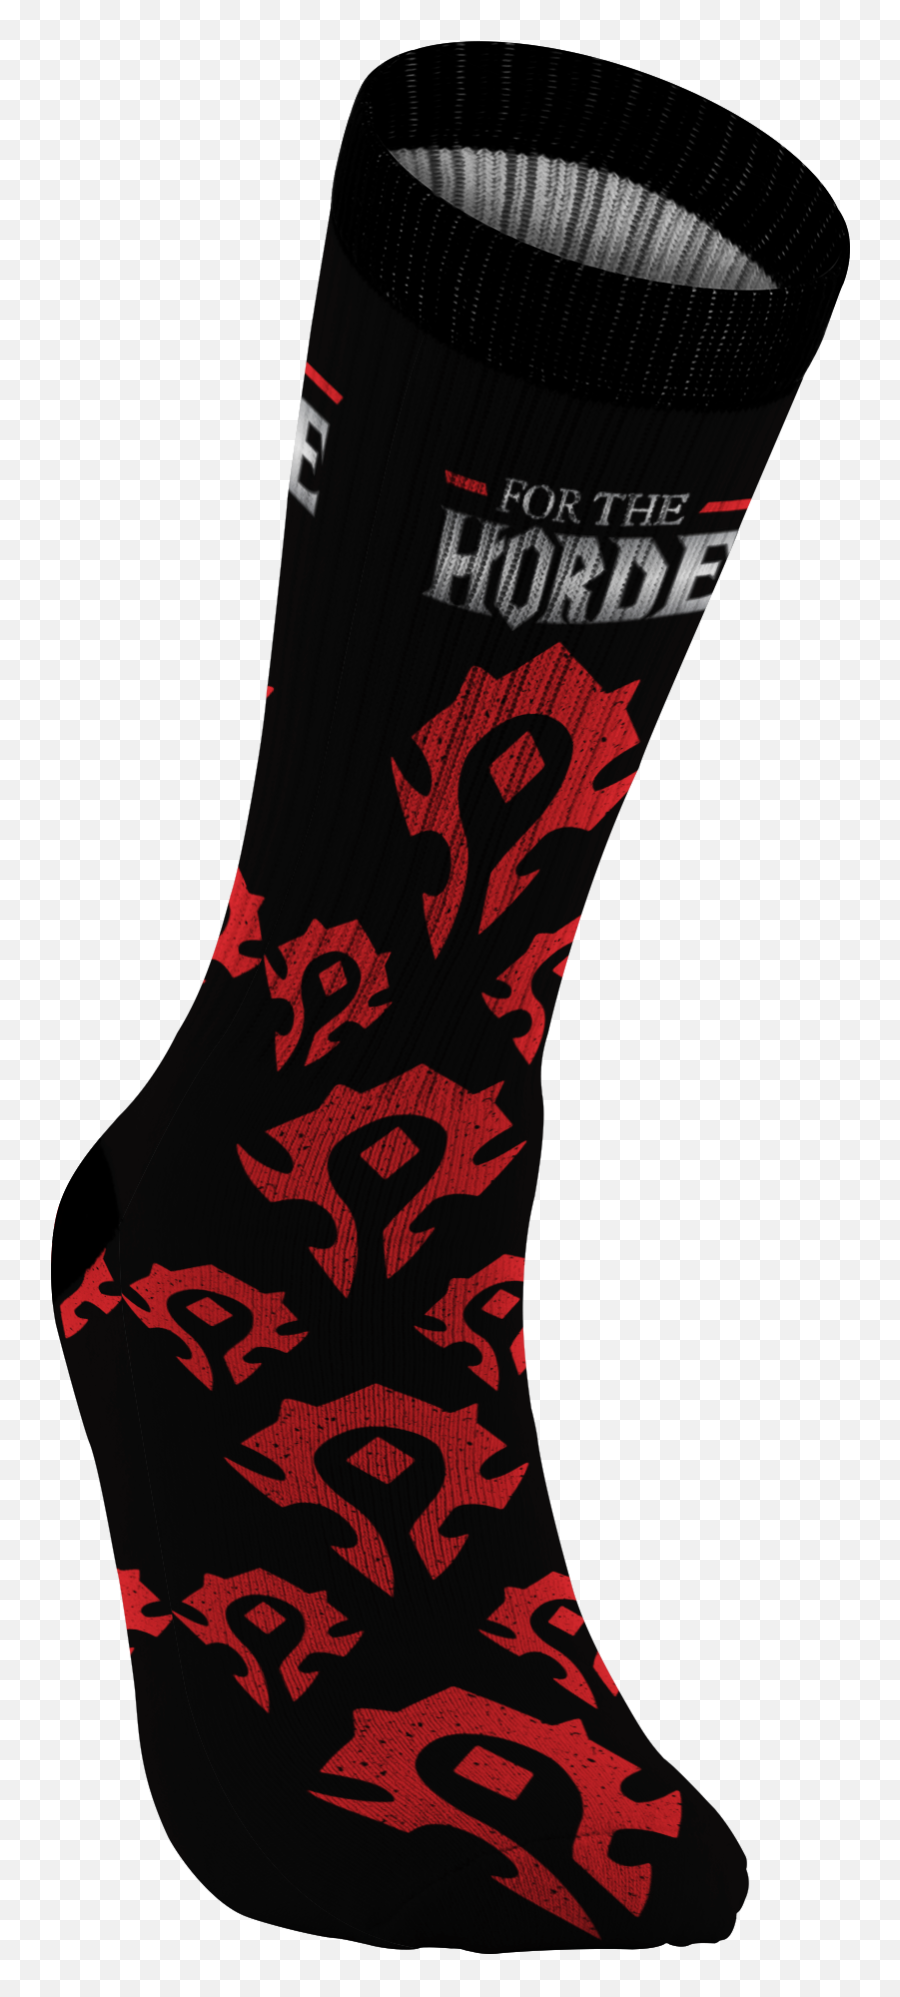 Download World Of Warcraft For The Horde Socks - Sock Png Girly,Horde Icon